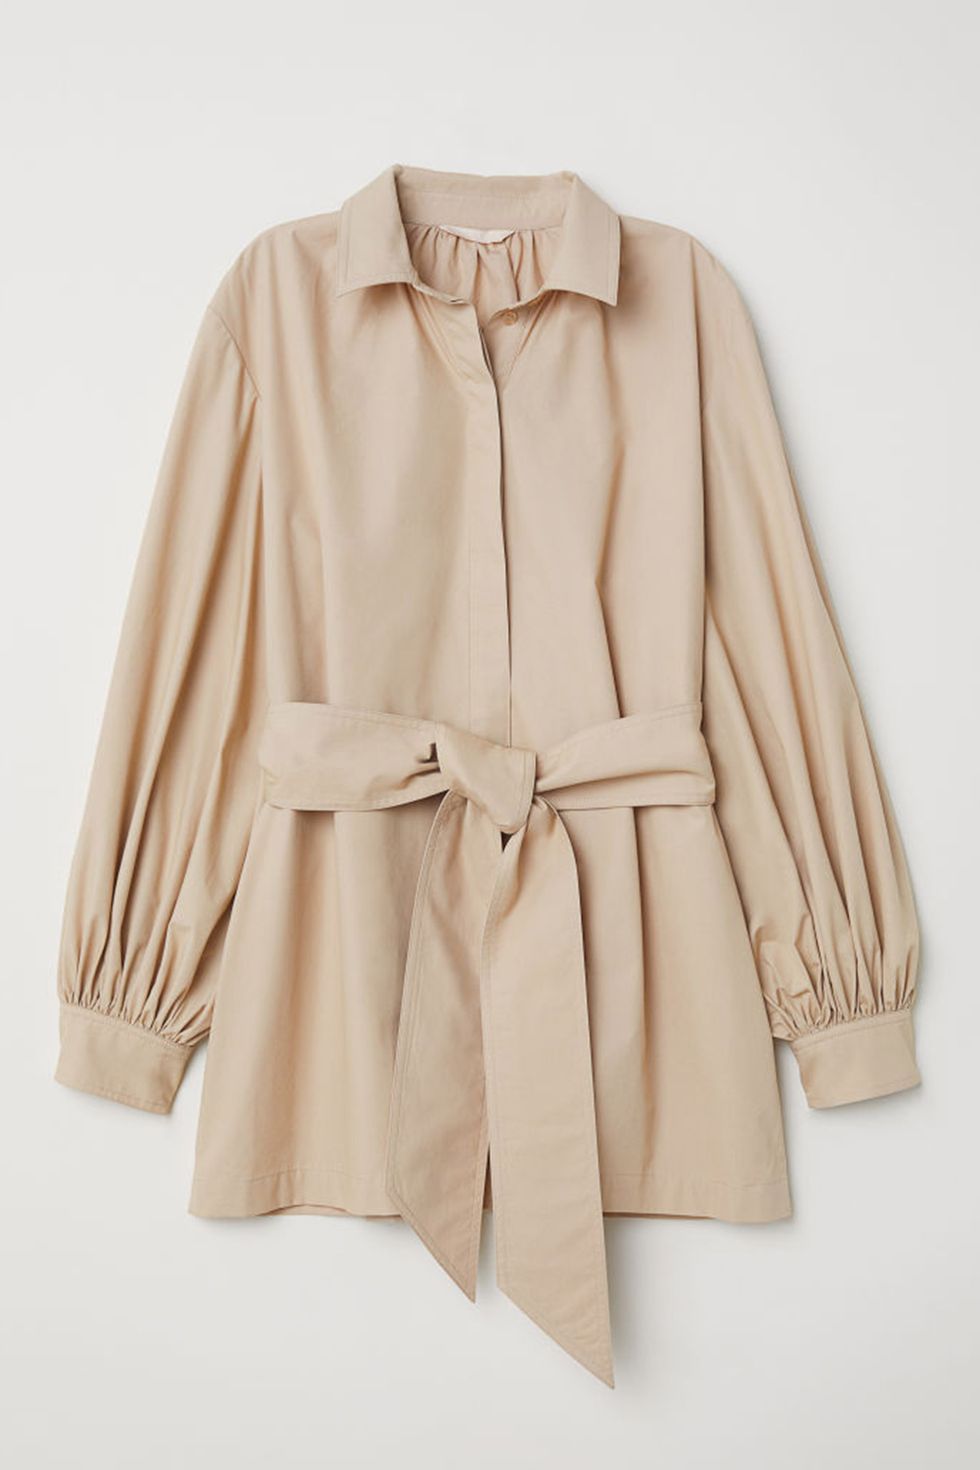 Clothing, Outerwear, Coat, Sleeve, Trench coat, Beige, Collar, Jacket, Overcoat, Blouse, 